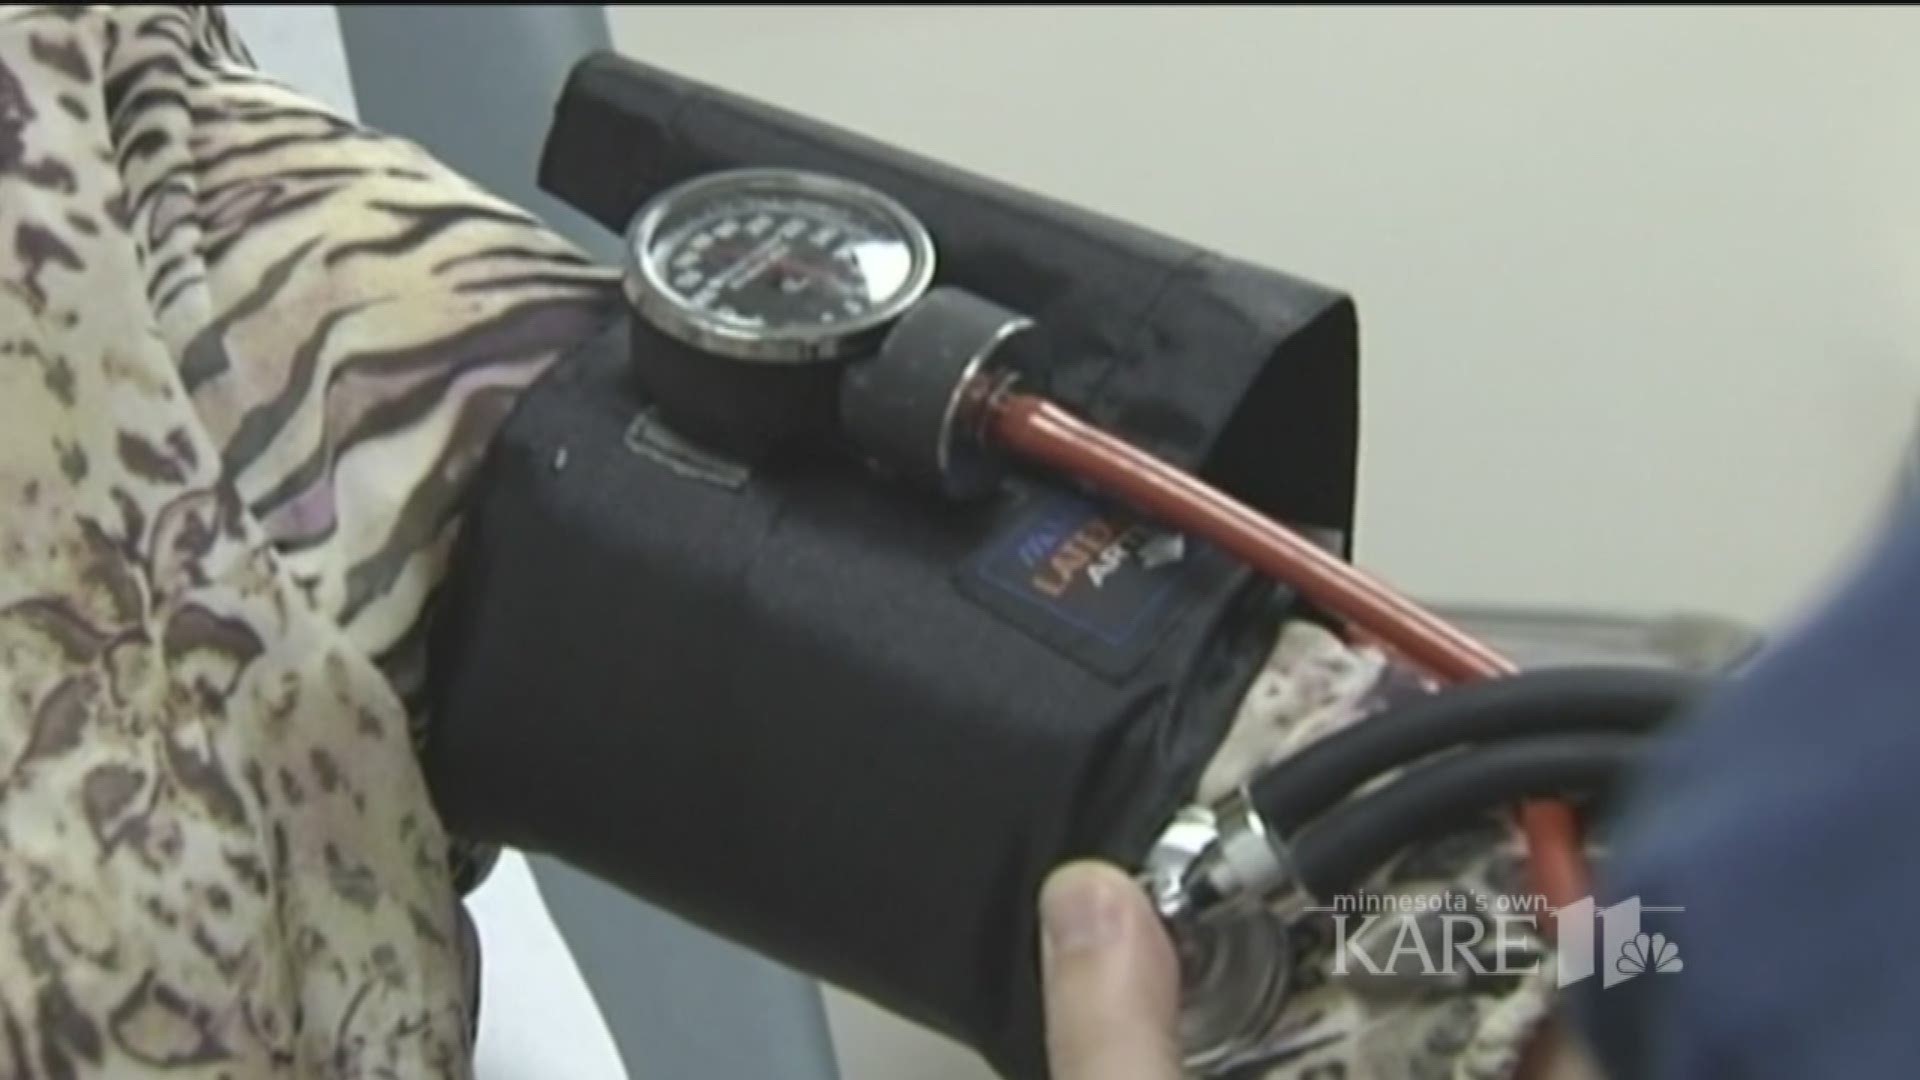 new study suggests younger adults and men are less likely to get treated for high blood pressure. http://kare11.tv/2eHemTz